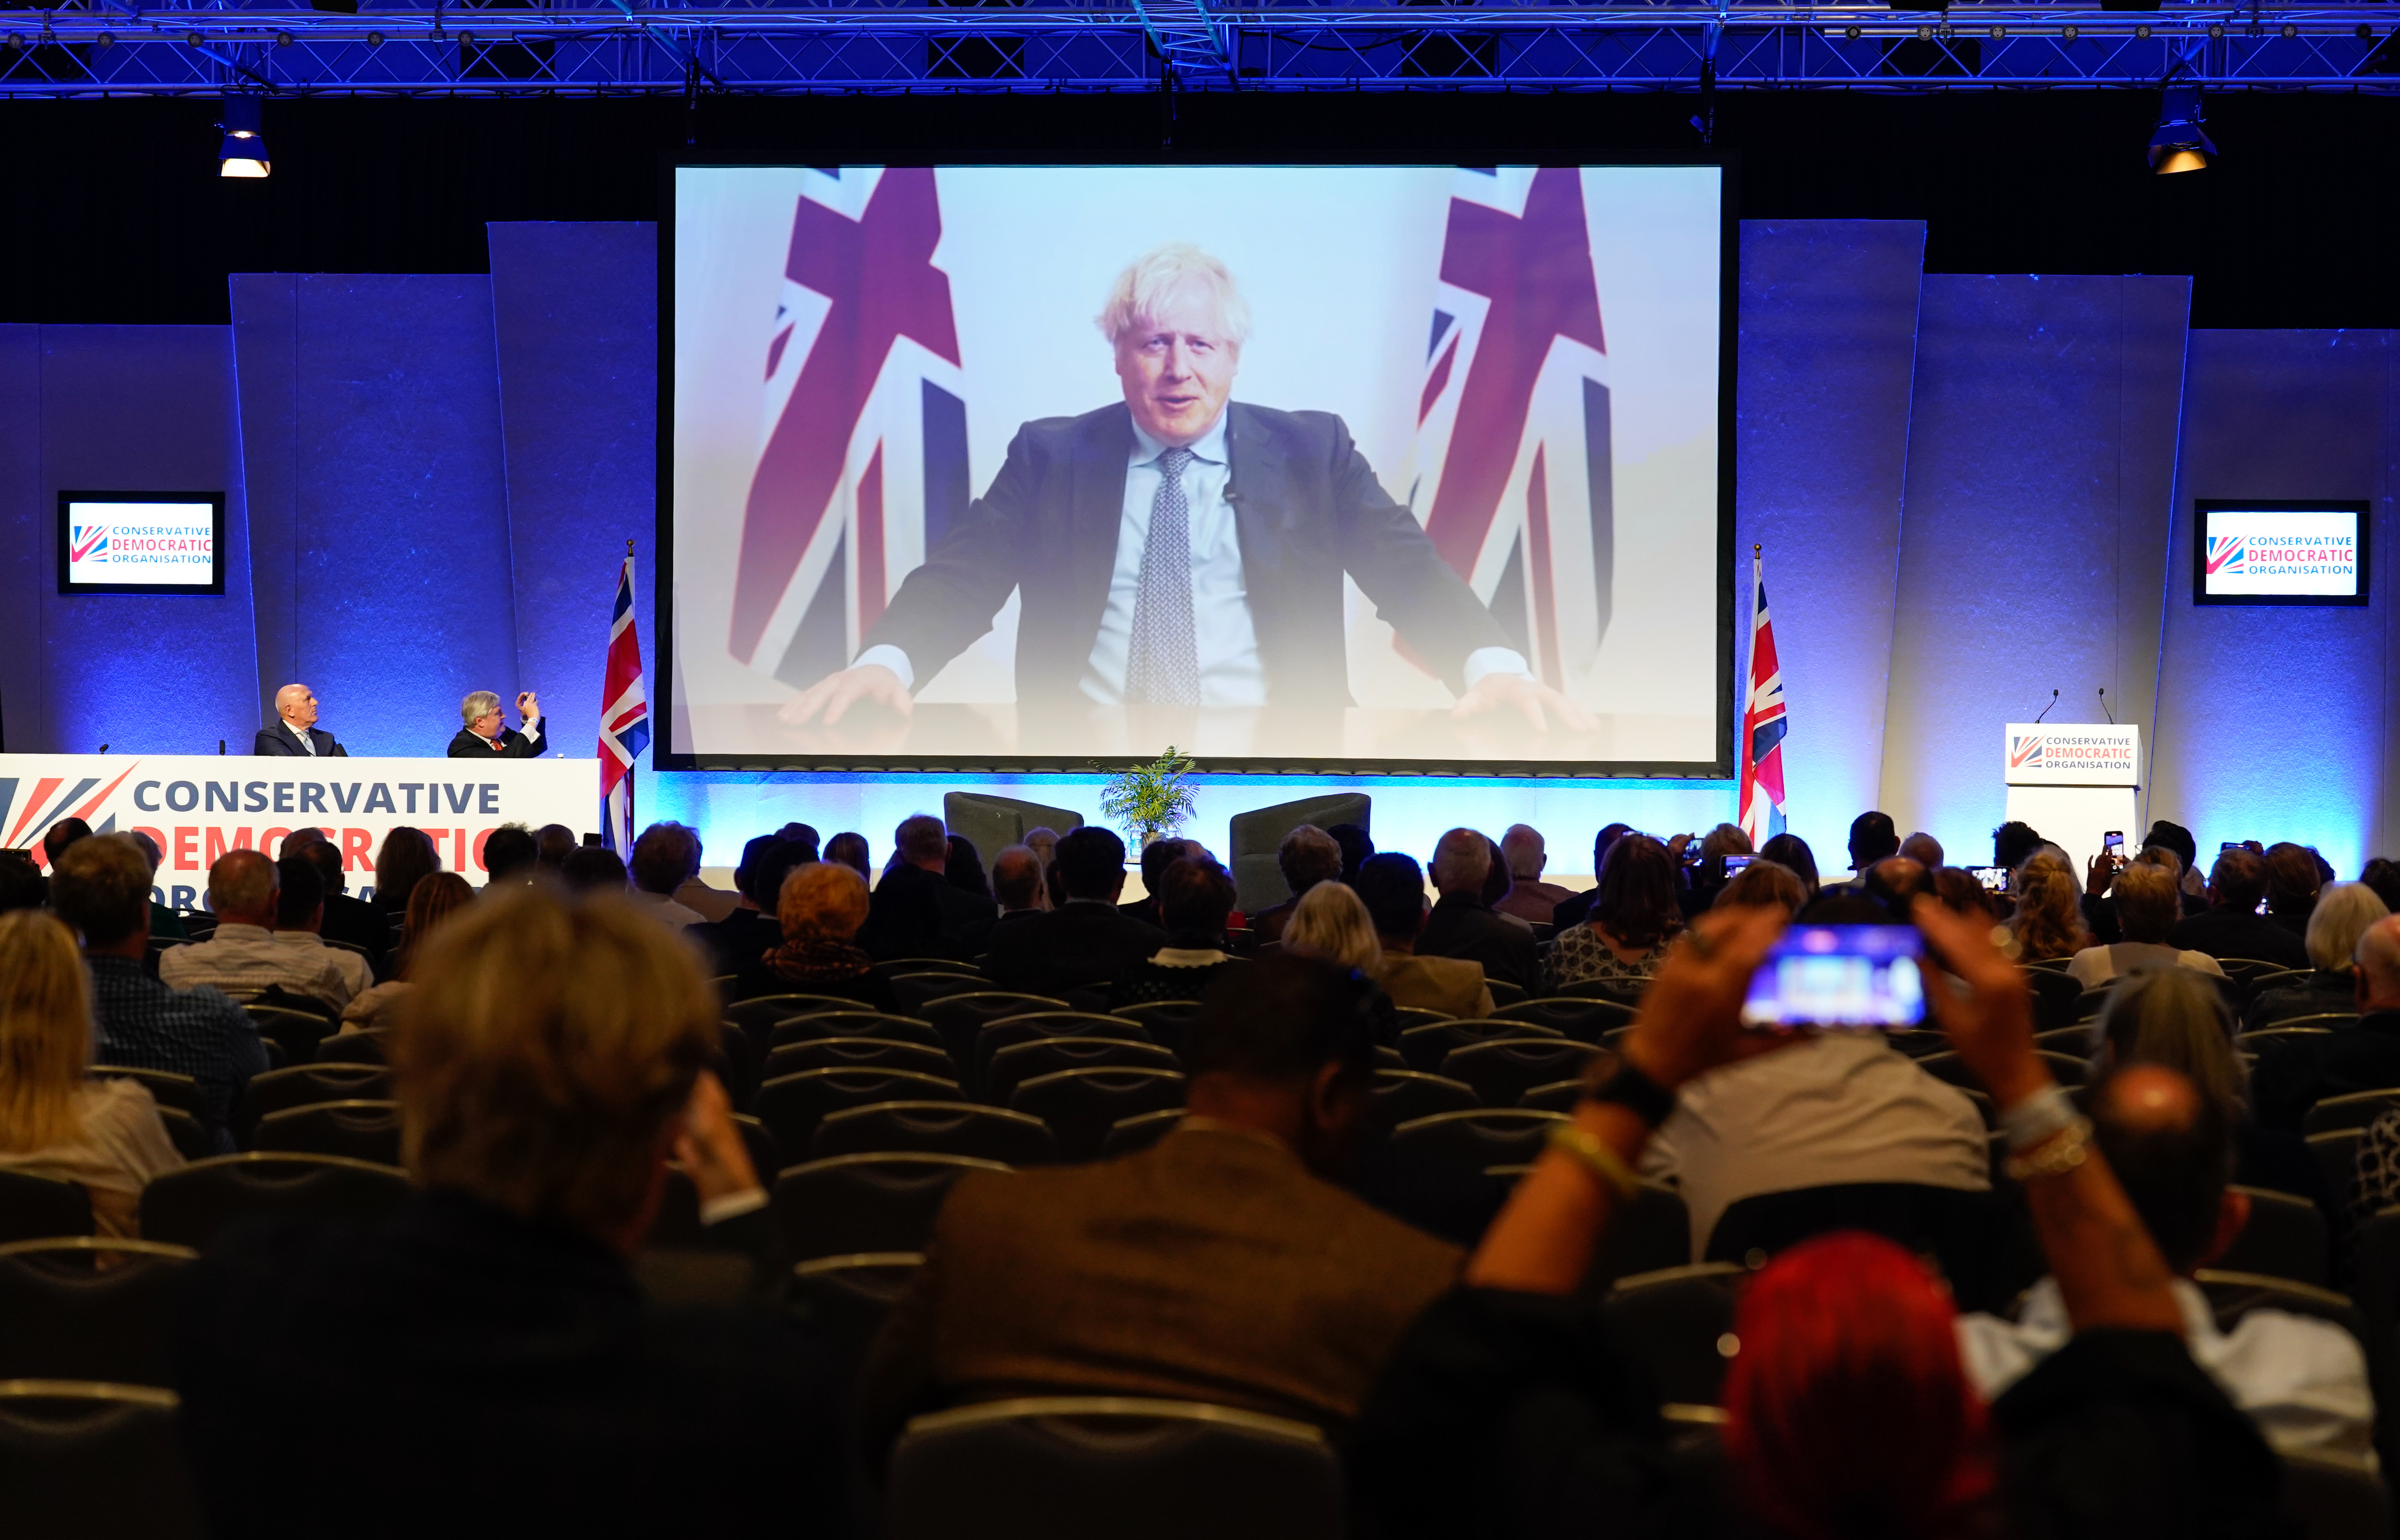 Government and Covid investigation at loggerheads as deadline for publication of Boris Johnson’s WhatsApp messages looms